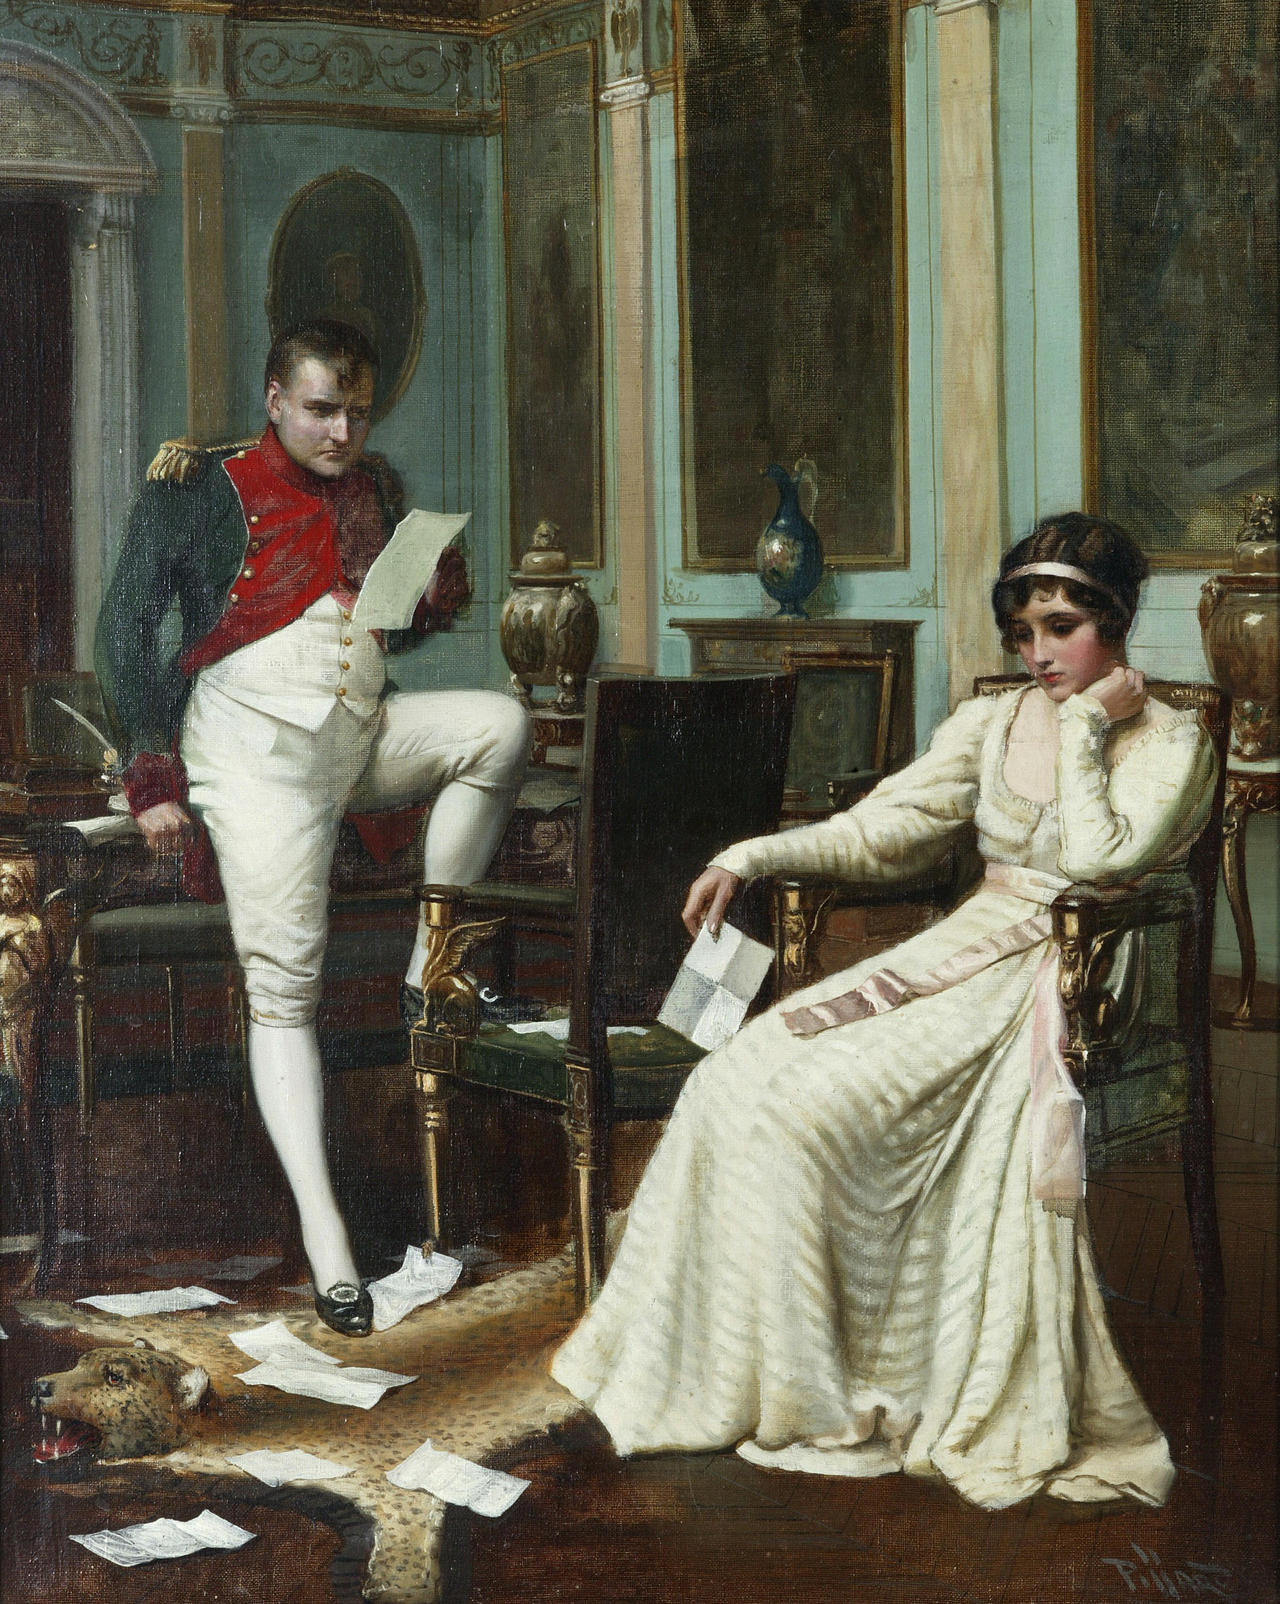 Napoleon and Josephine, an imperial couple